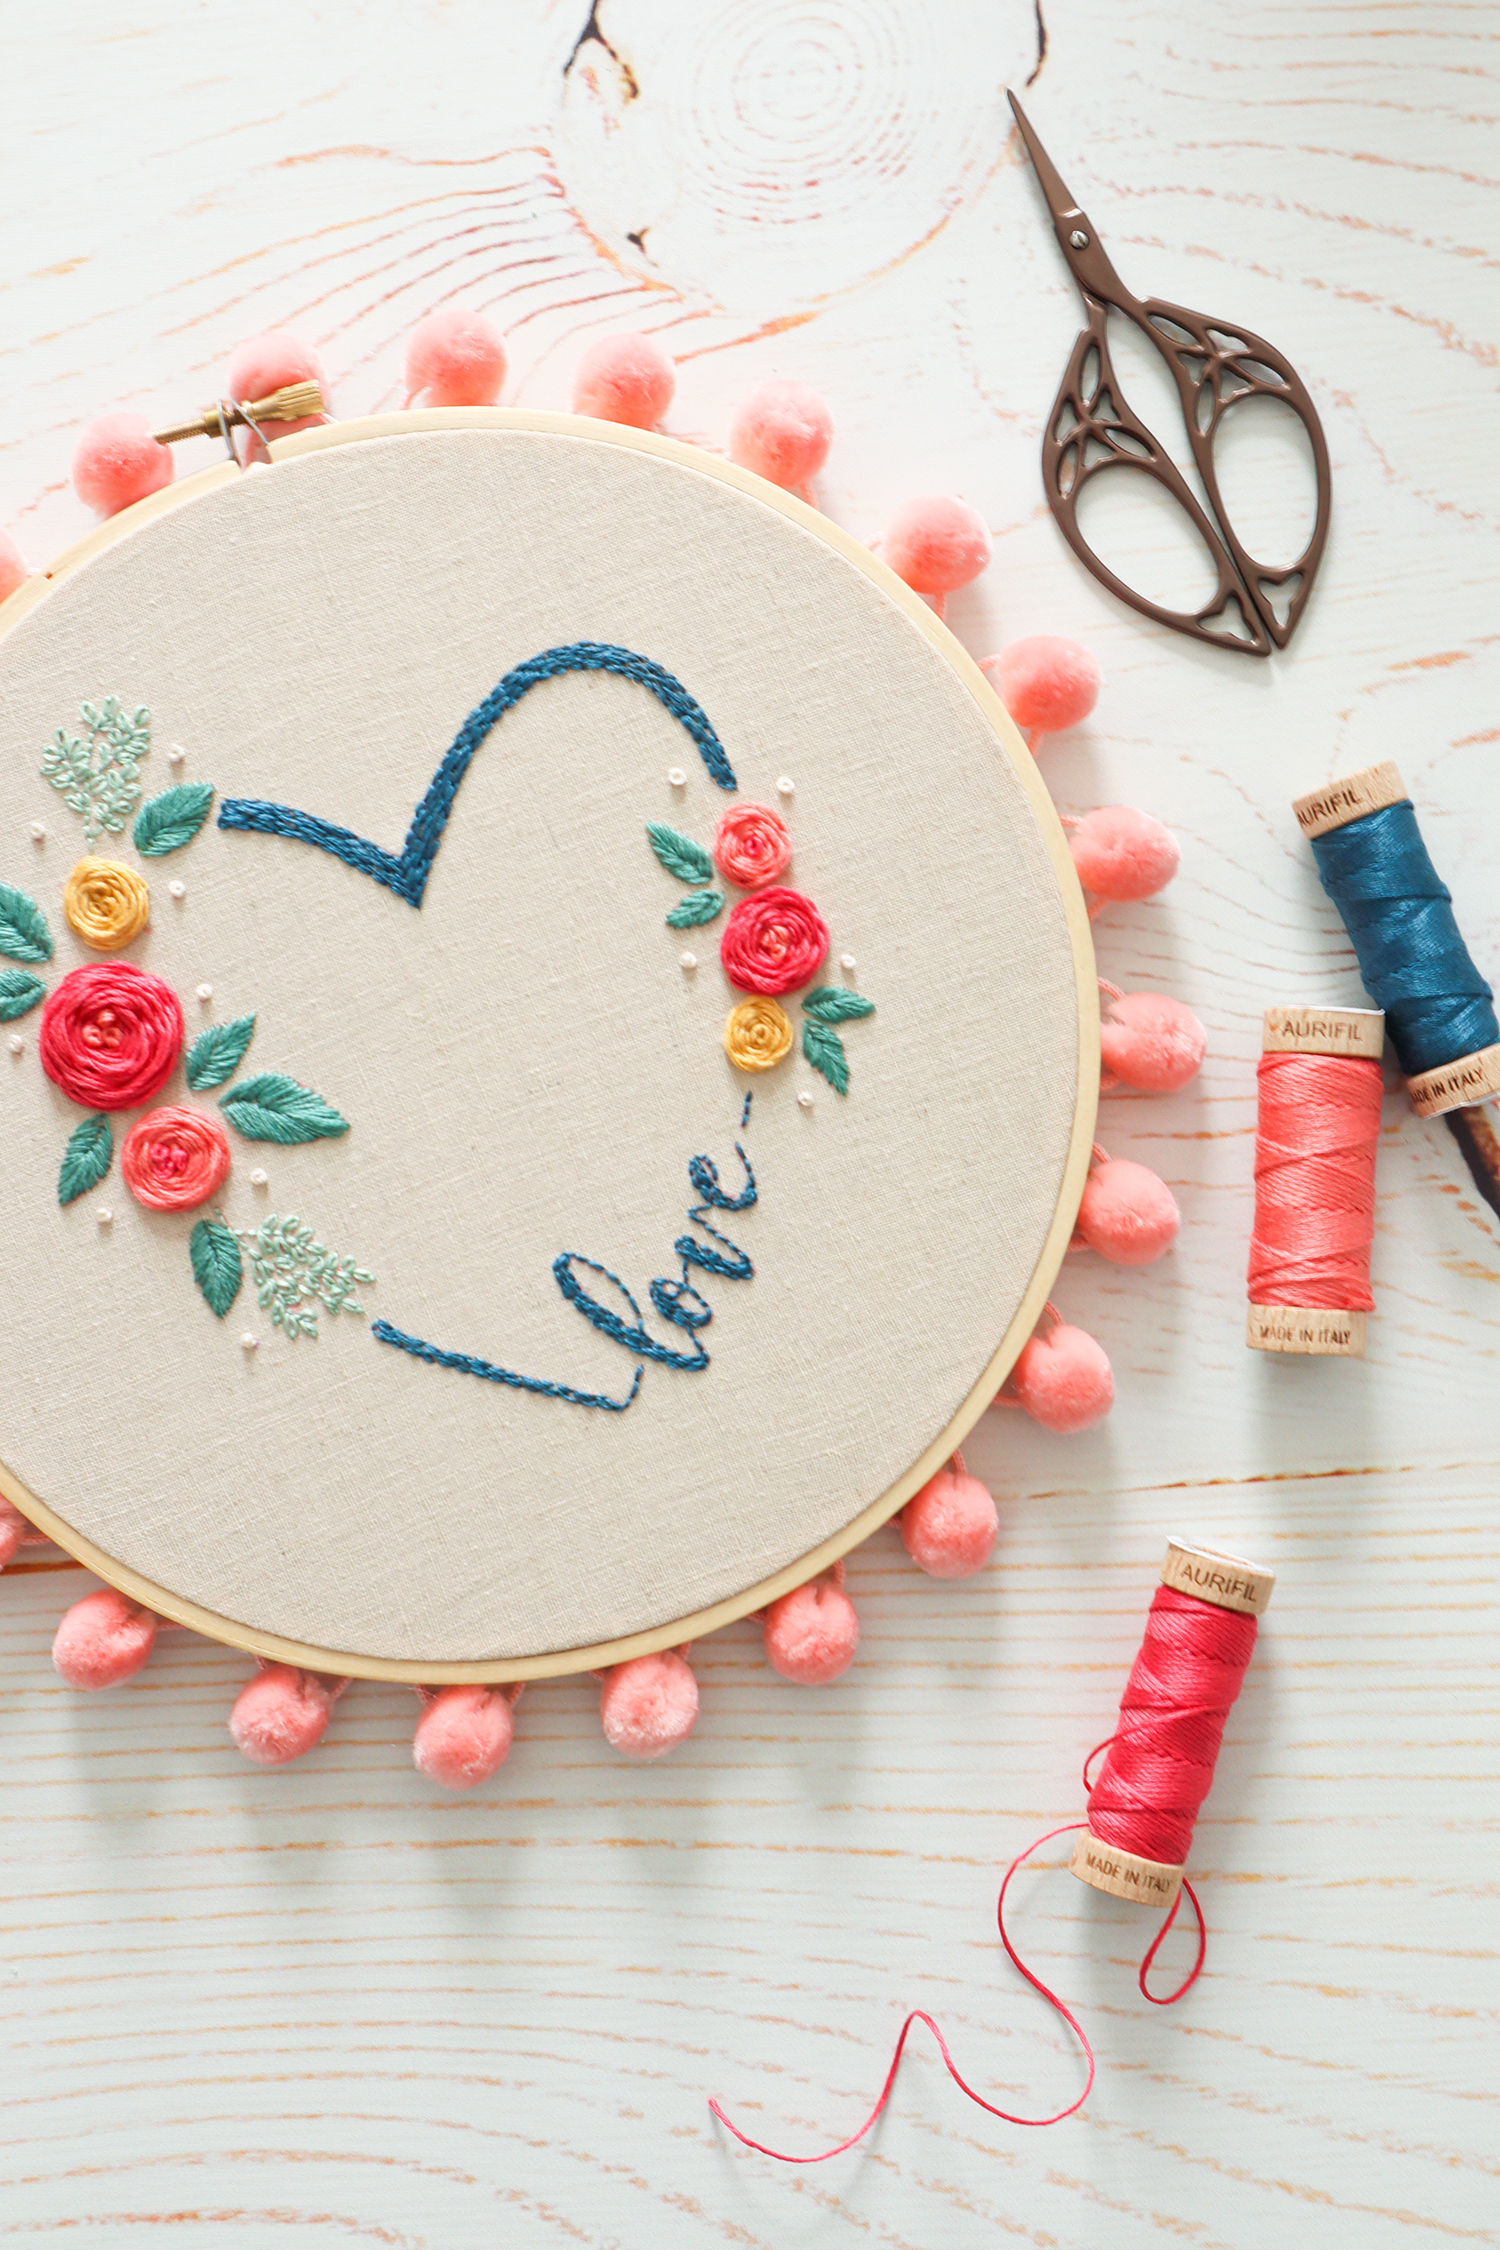 https://flamingotoes.com/wp-content/uploads/2022/01/All-you-Need-is-Love-Embroidery-Hoop-ARt.jpg